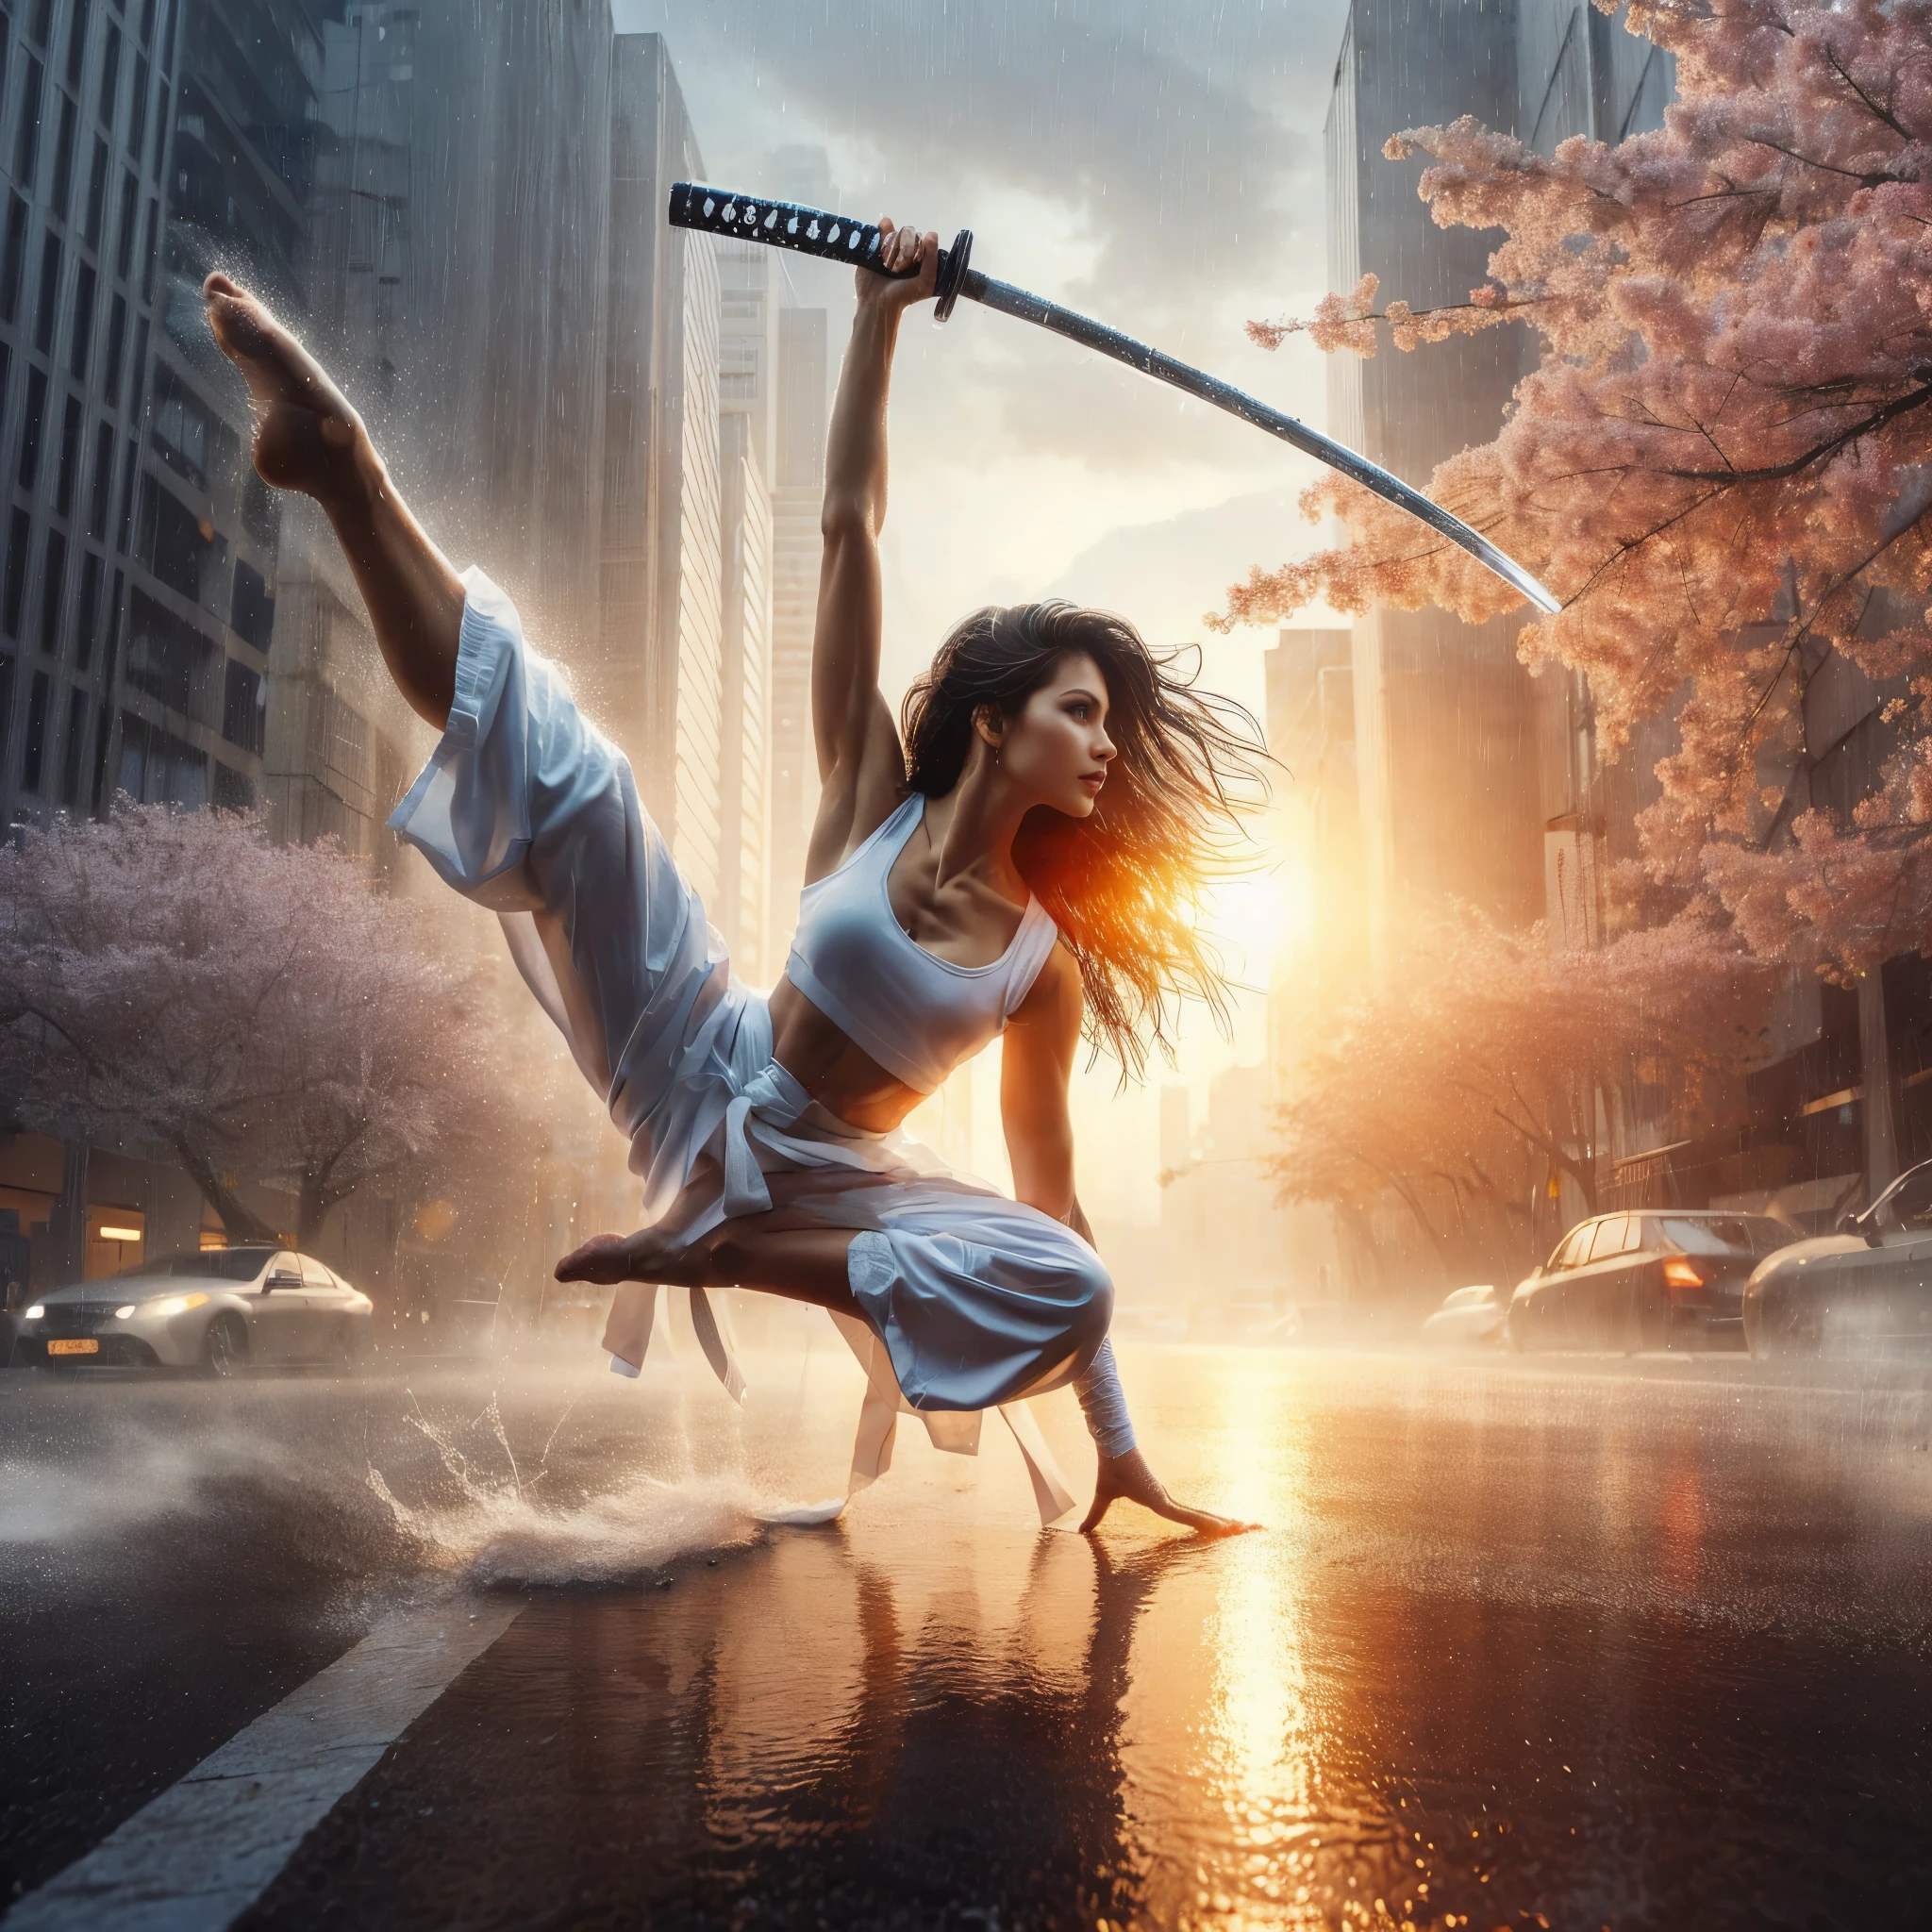 super high angle shot, a beautiful woman tribal,carrying white katana,doing stunning somersaults in city street, wearing white thin shirt,sunrise, background a falling cherry blossoms and city street,perfect proportional body, rainy atmosphere,stunning splash water effects from katana movement, smoke,ultra HD 32K,detailed and intricate, light focused on faces, ultra detail on faces,hyperrealistic, superrealistic photography, lighting on the front.